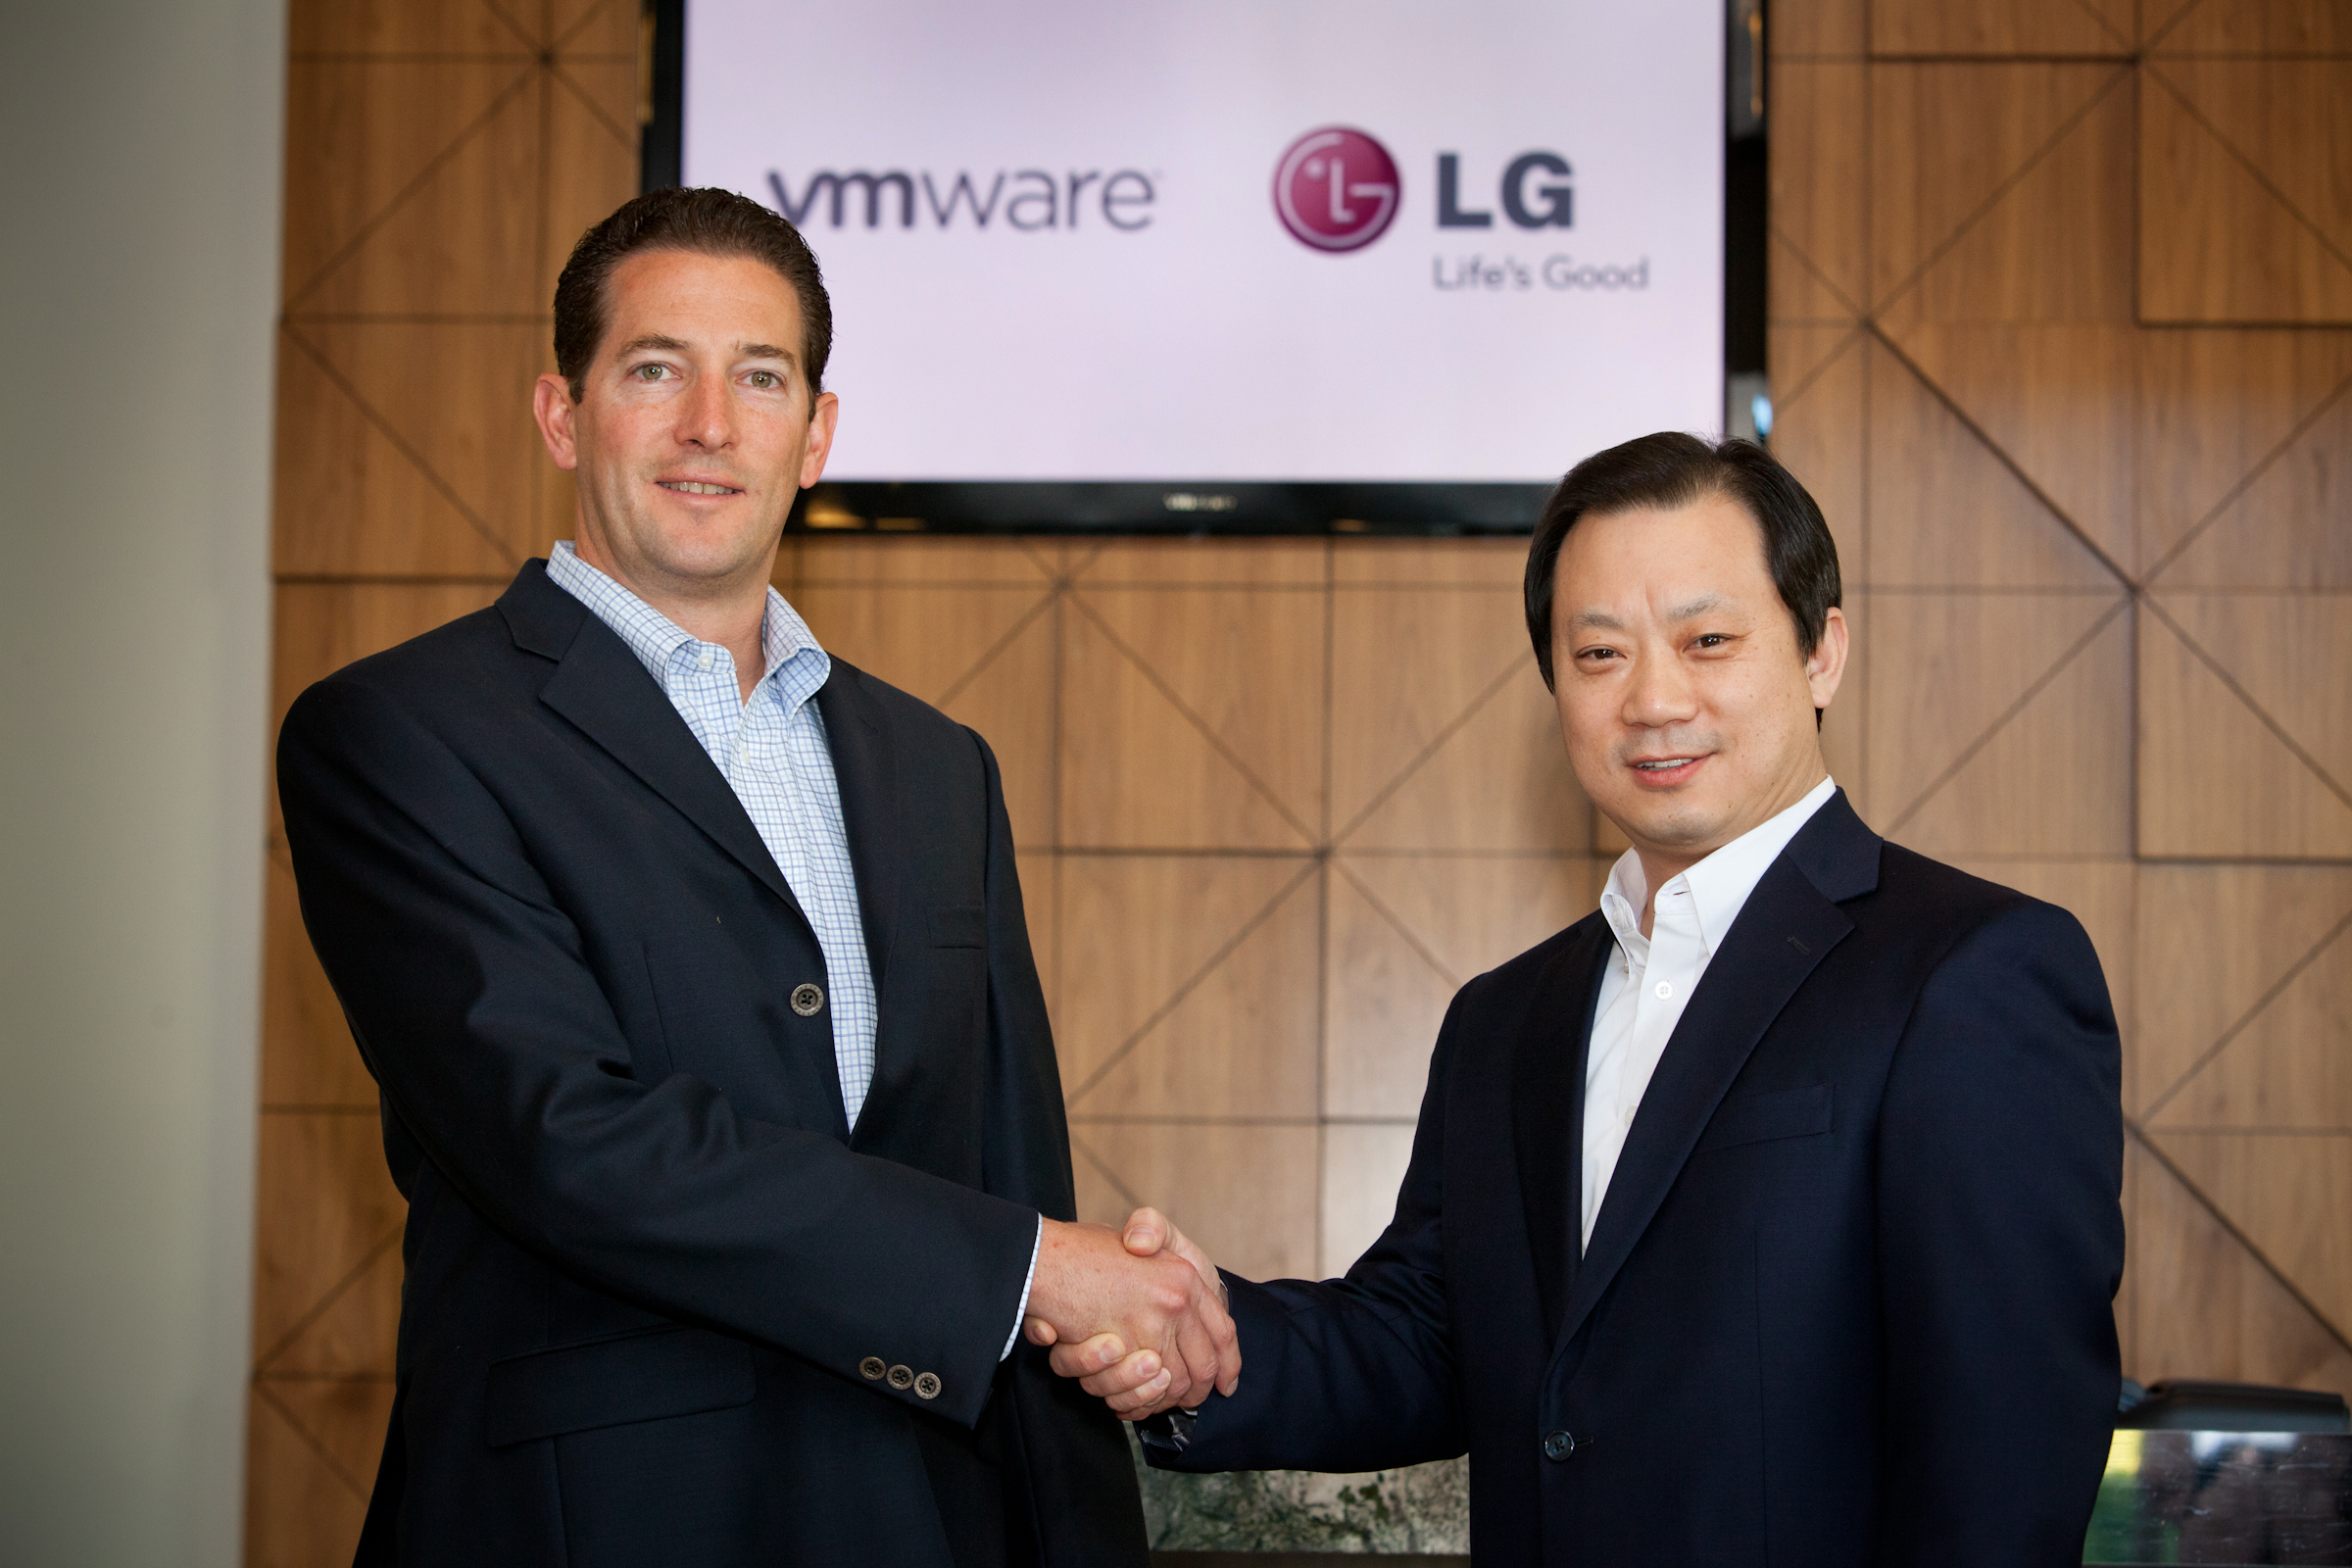 LG AND VMWARE JOIN FORCES TO ACCELERATE ENTERPRISE ADOPTION OF EMPLOY